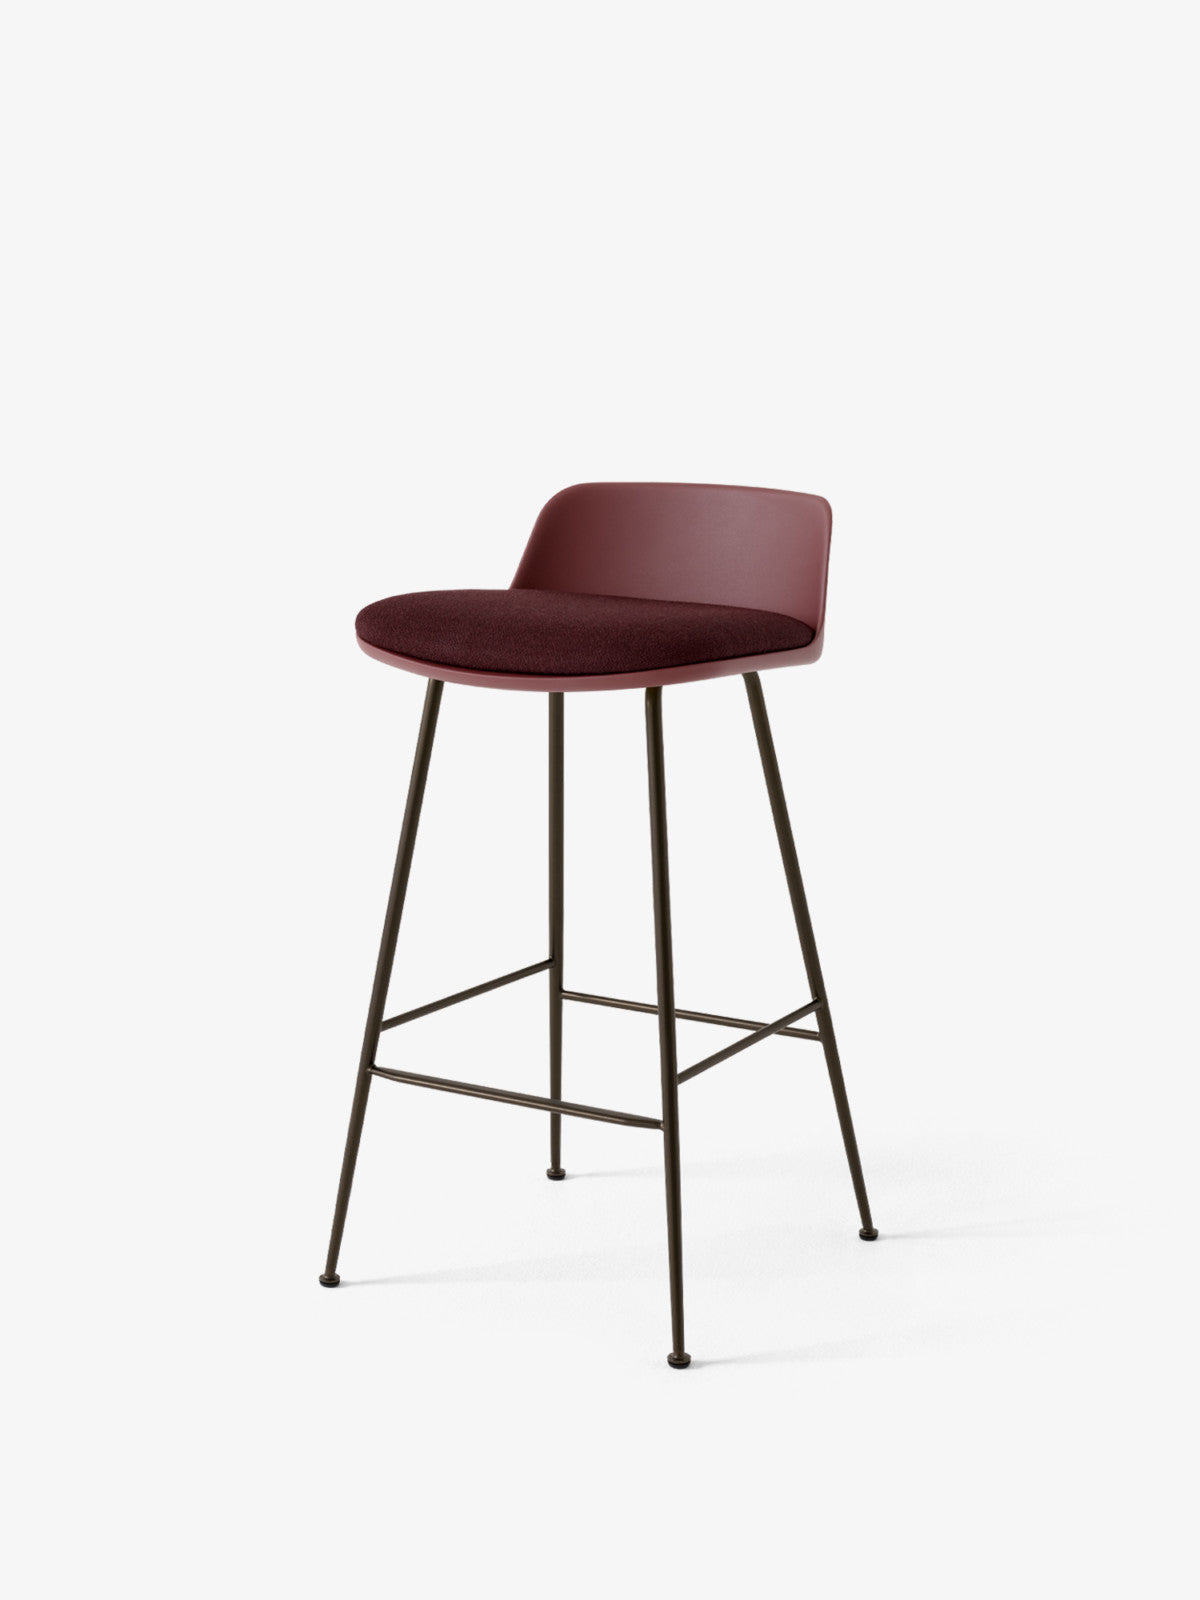 Rely Counter Stool HW82 Seat Upholstery